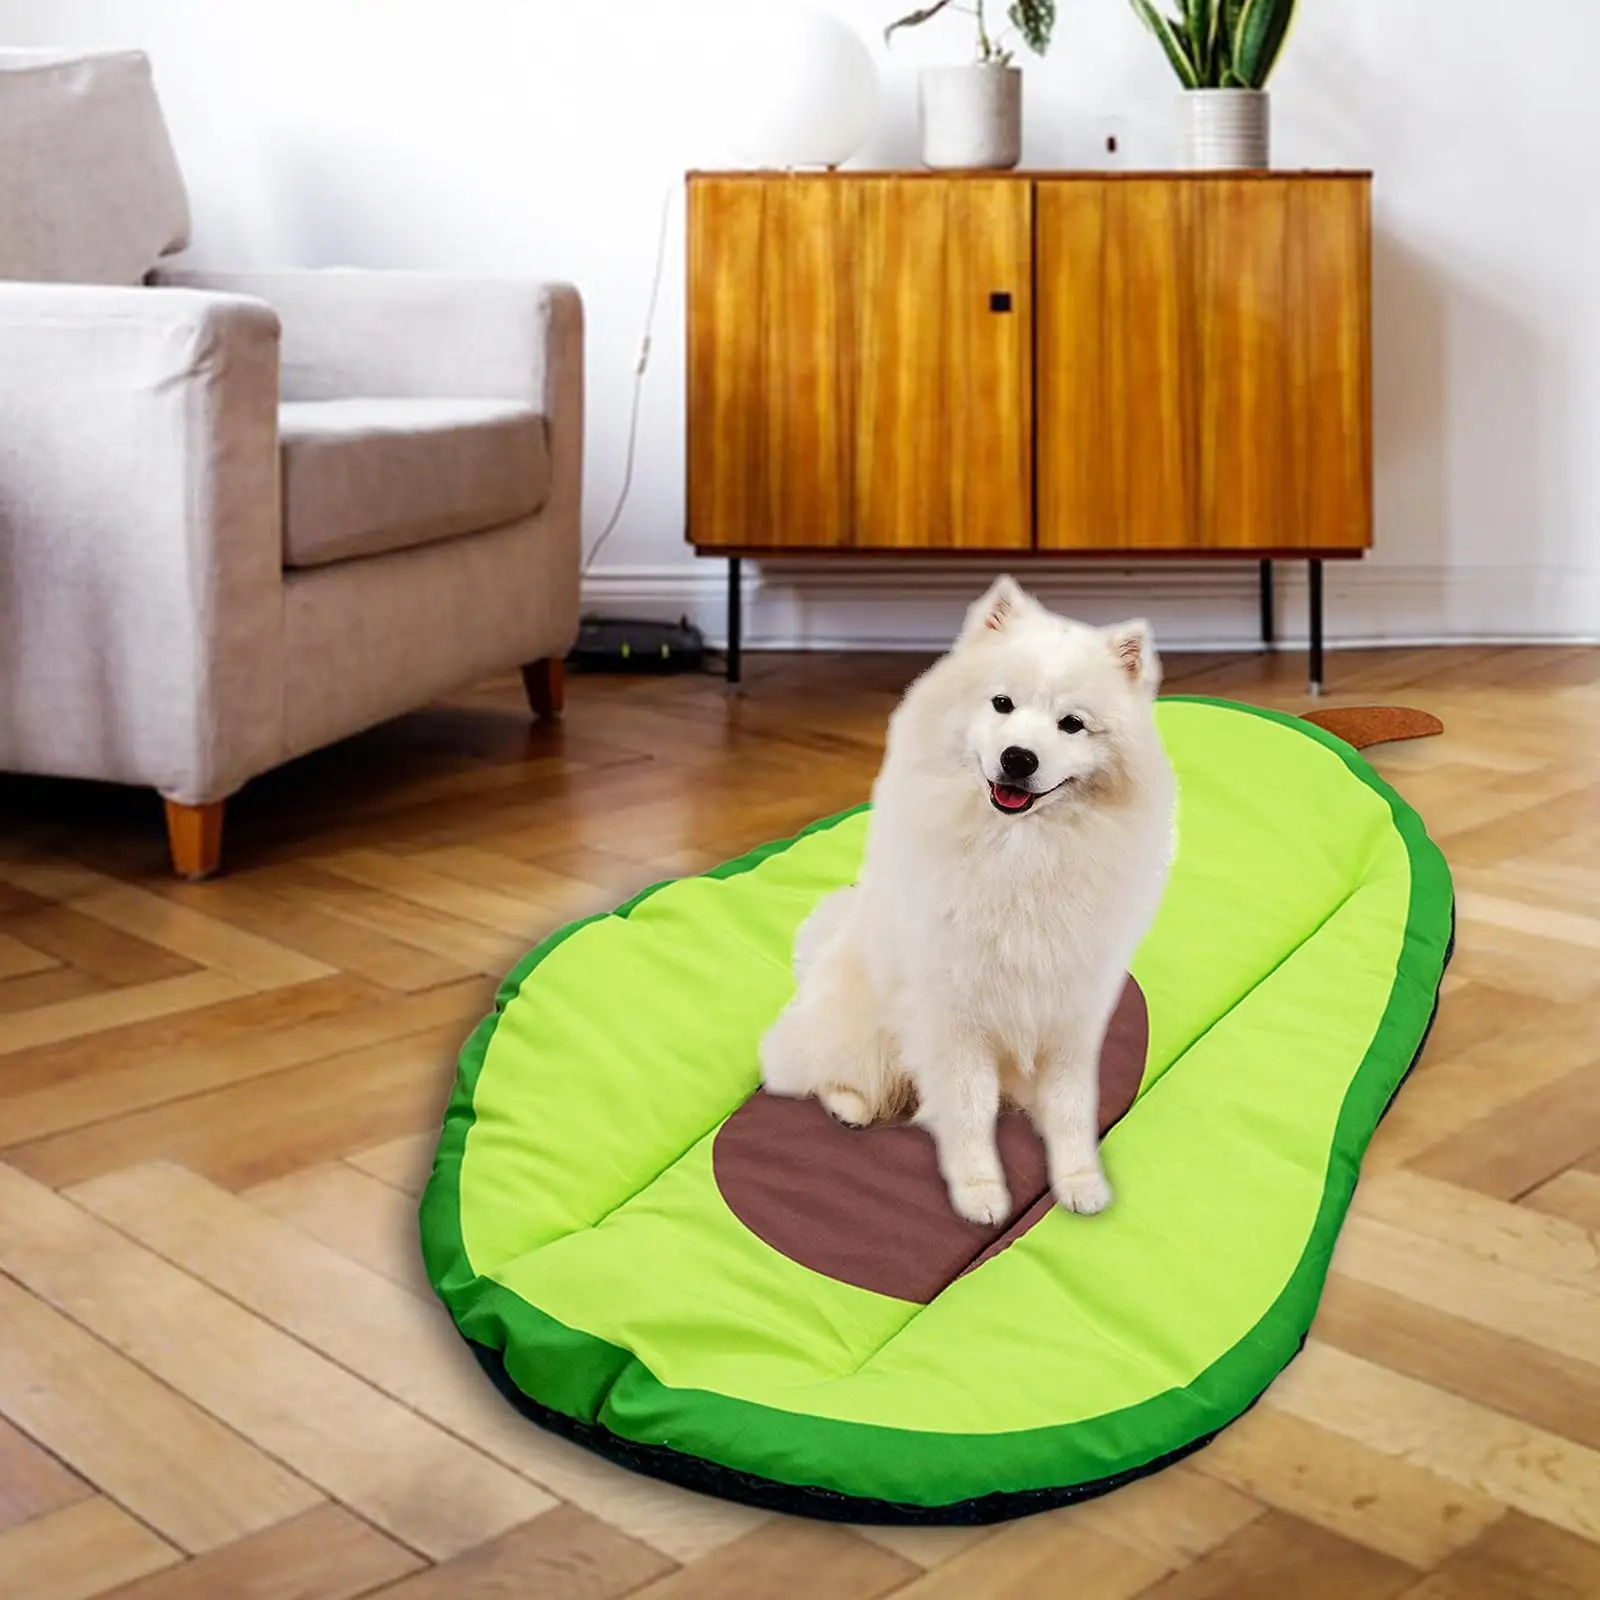 Pet Blanket Cat Bed Mat Dog Sleeping Pad Winter Crate Pad Cushion Bedding Kennel Comfortable Mattress Nest for Puppy Home Decor